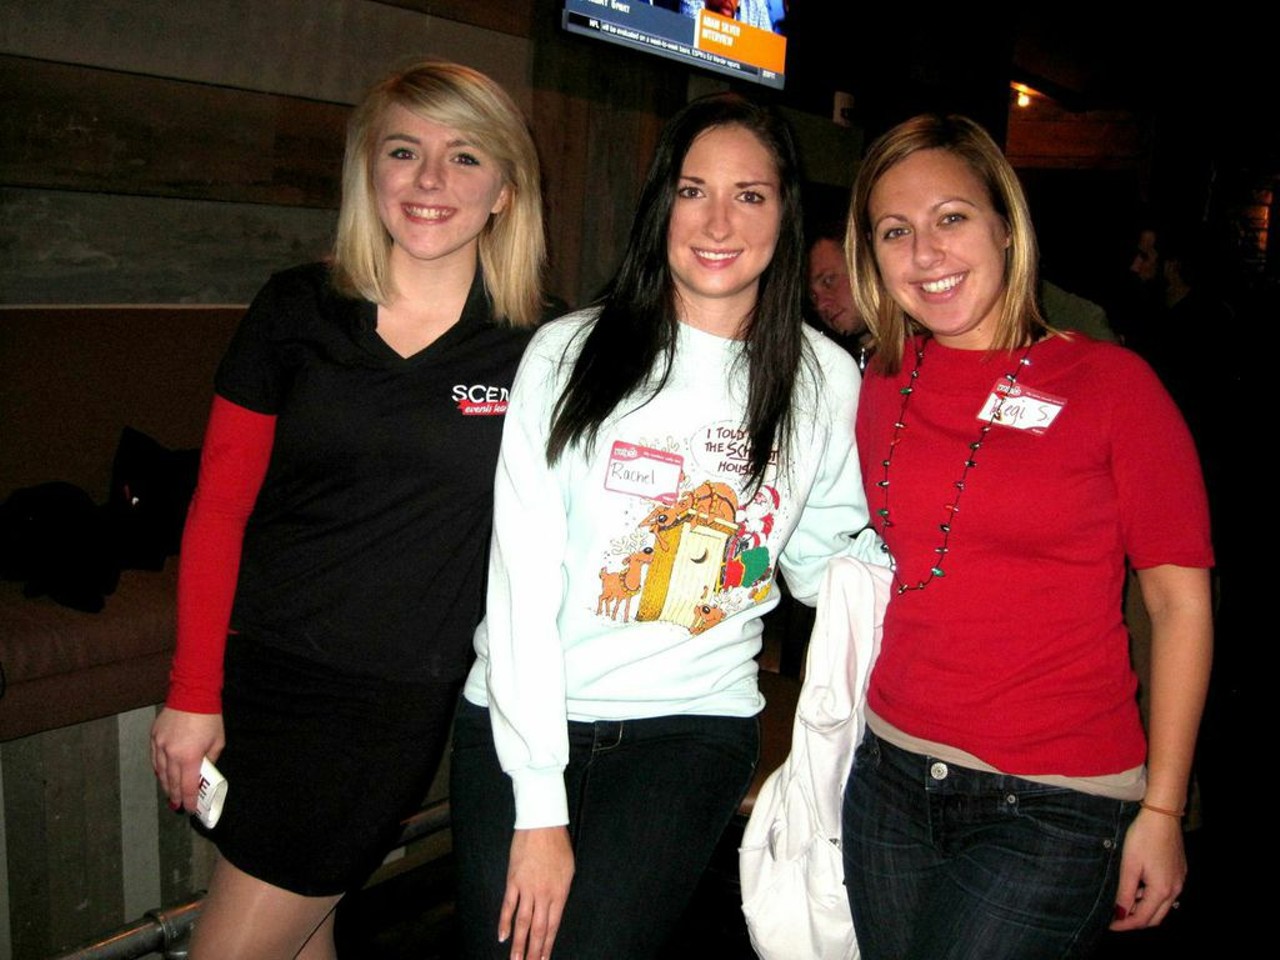 Fun Photos of The Scene Events Team at Yelp's Hoppy Holidaze Elite Party at Holy Craft!